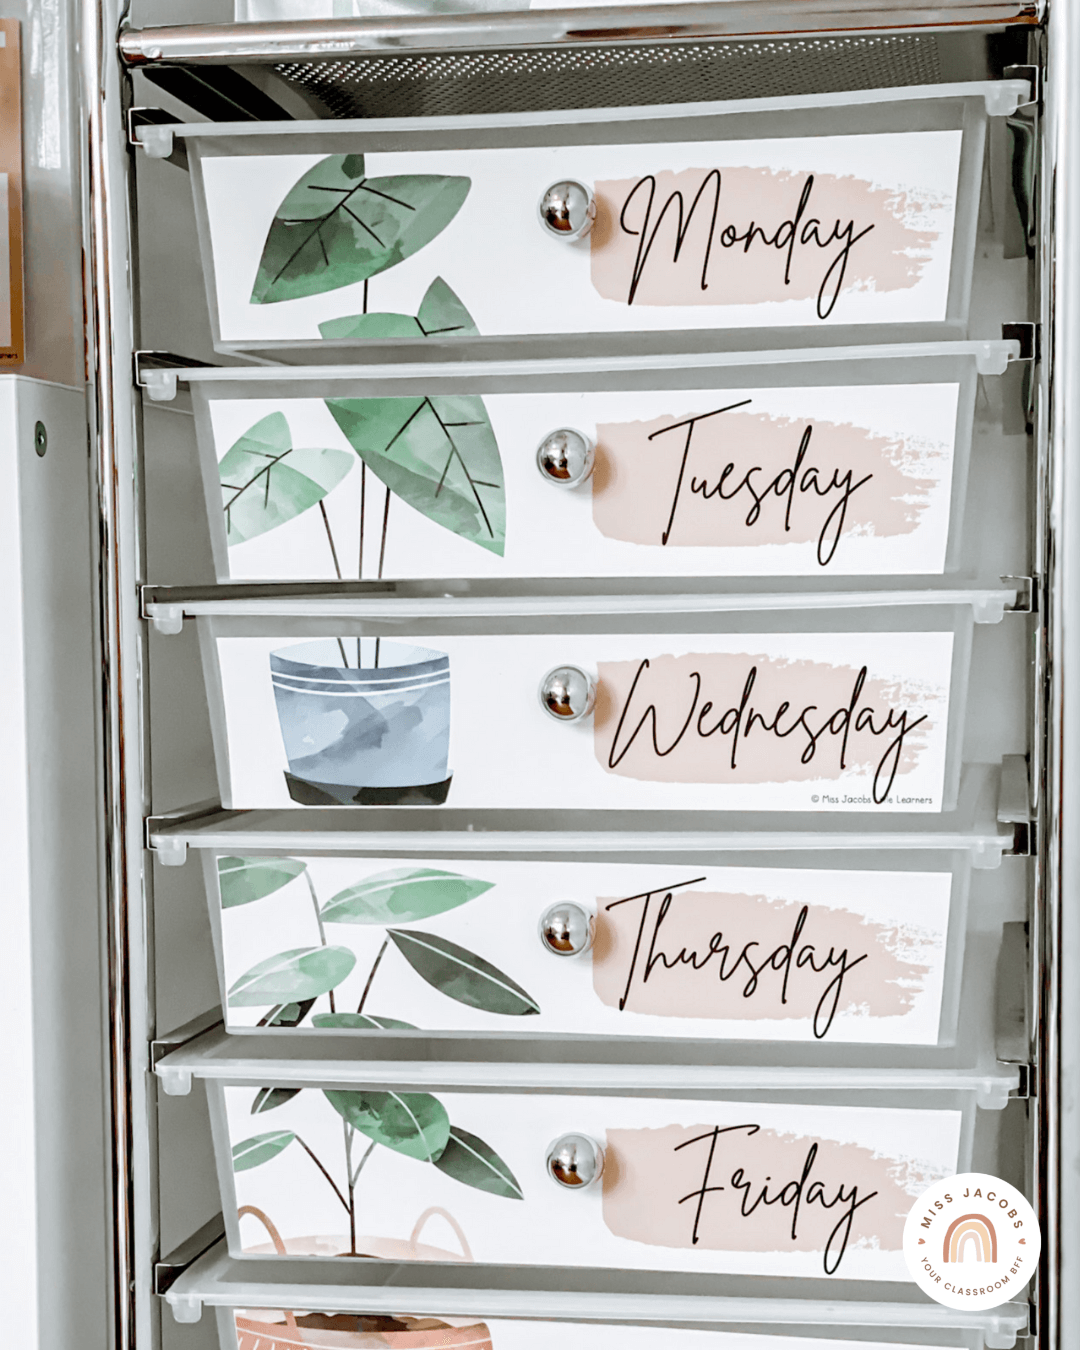 Two images show white book tubs (on the left) and a teachers’ trolley on the right. They’re labelled with items from the Boho Plants range - which is comprised of illustrated plants in blue and green tones, set against a muted blush background.